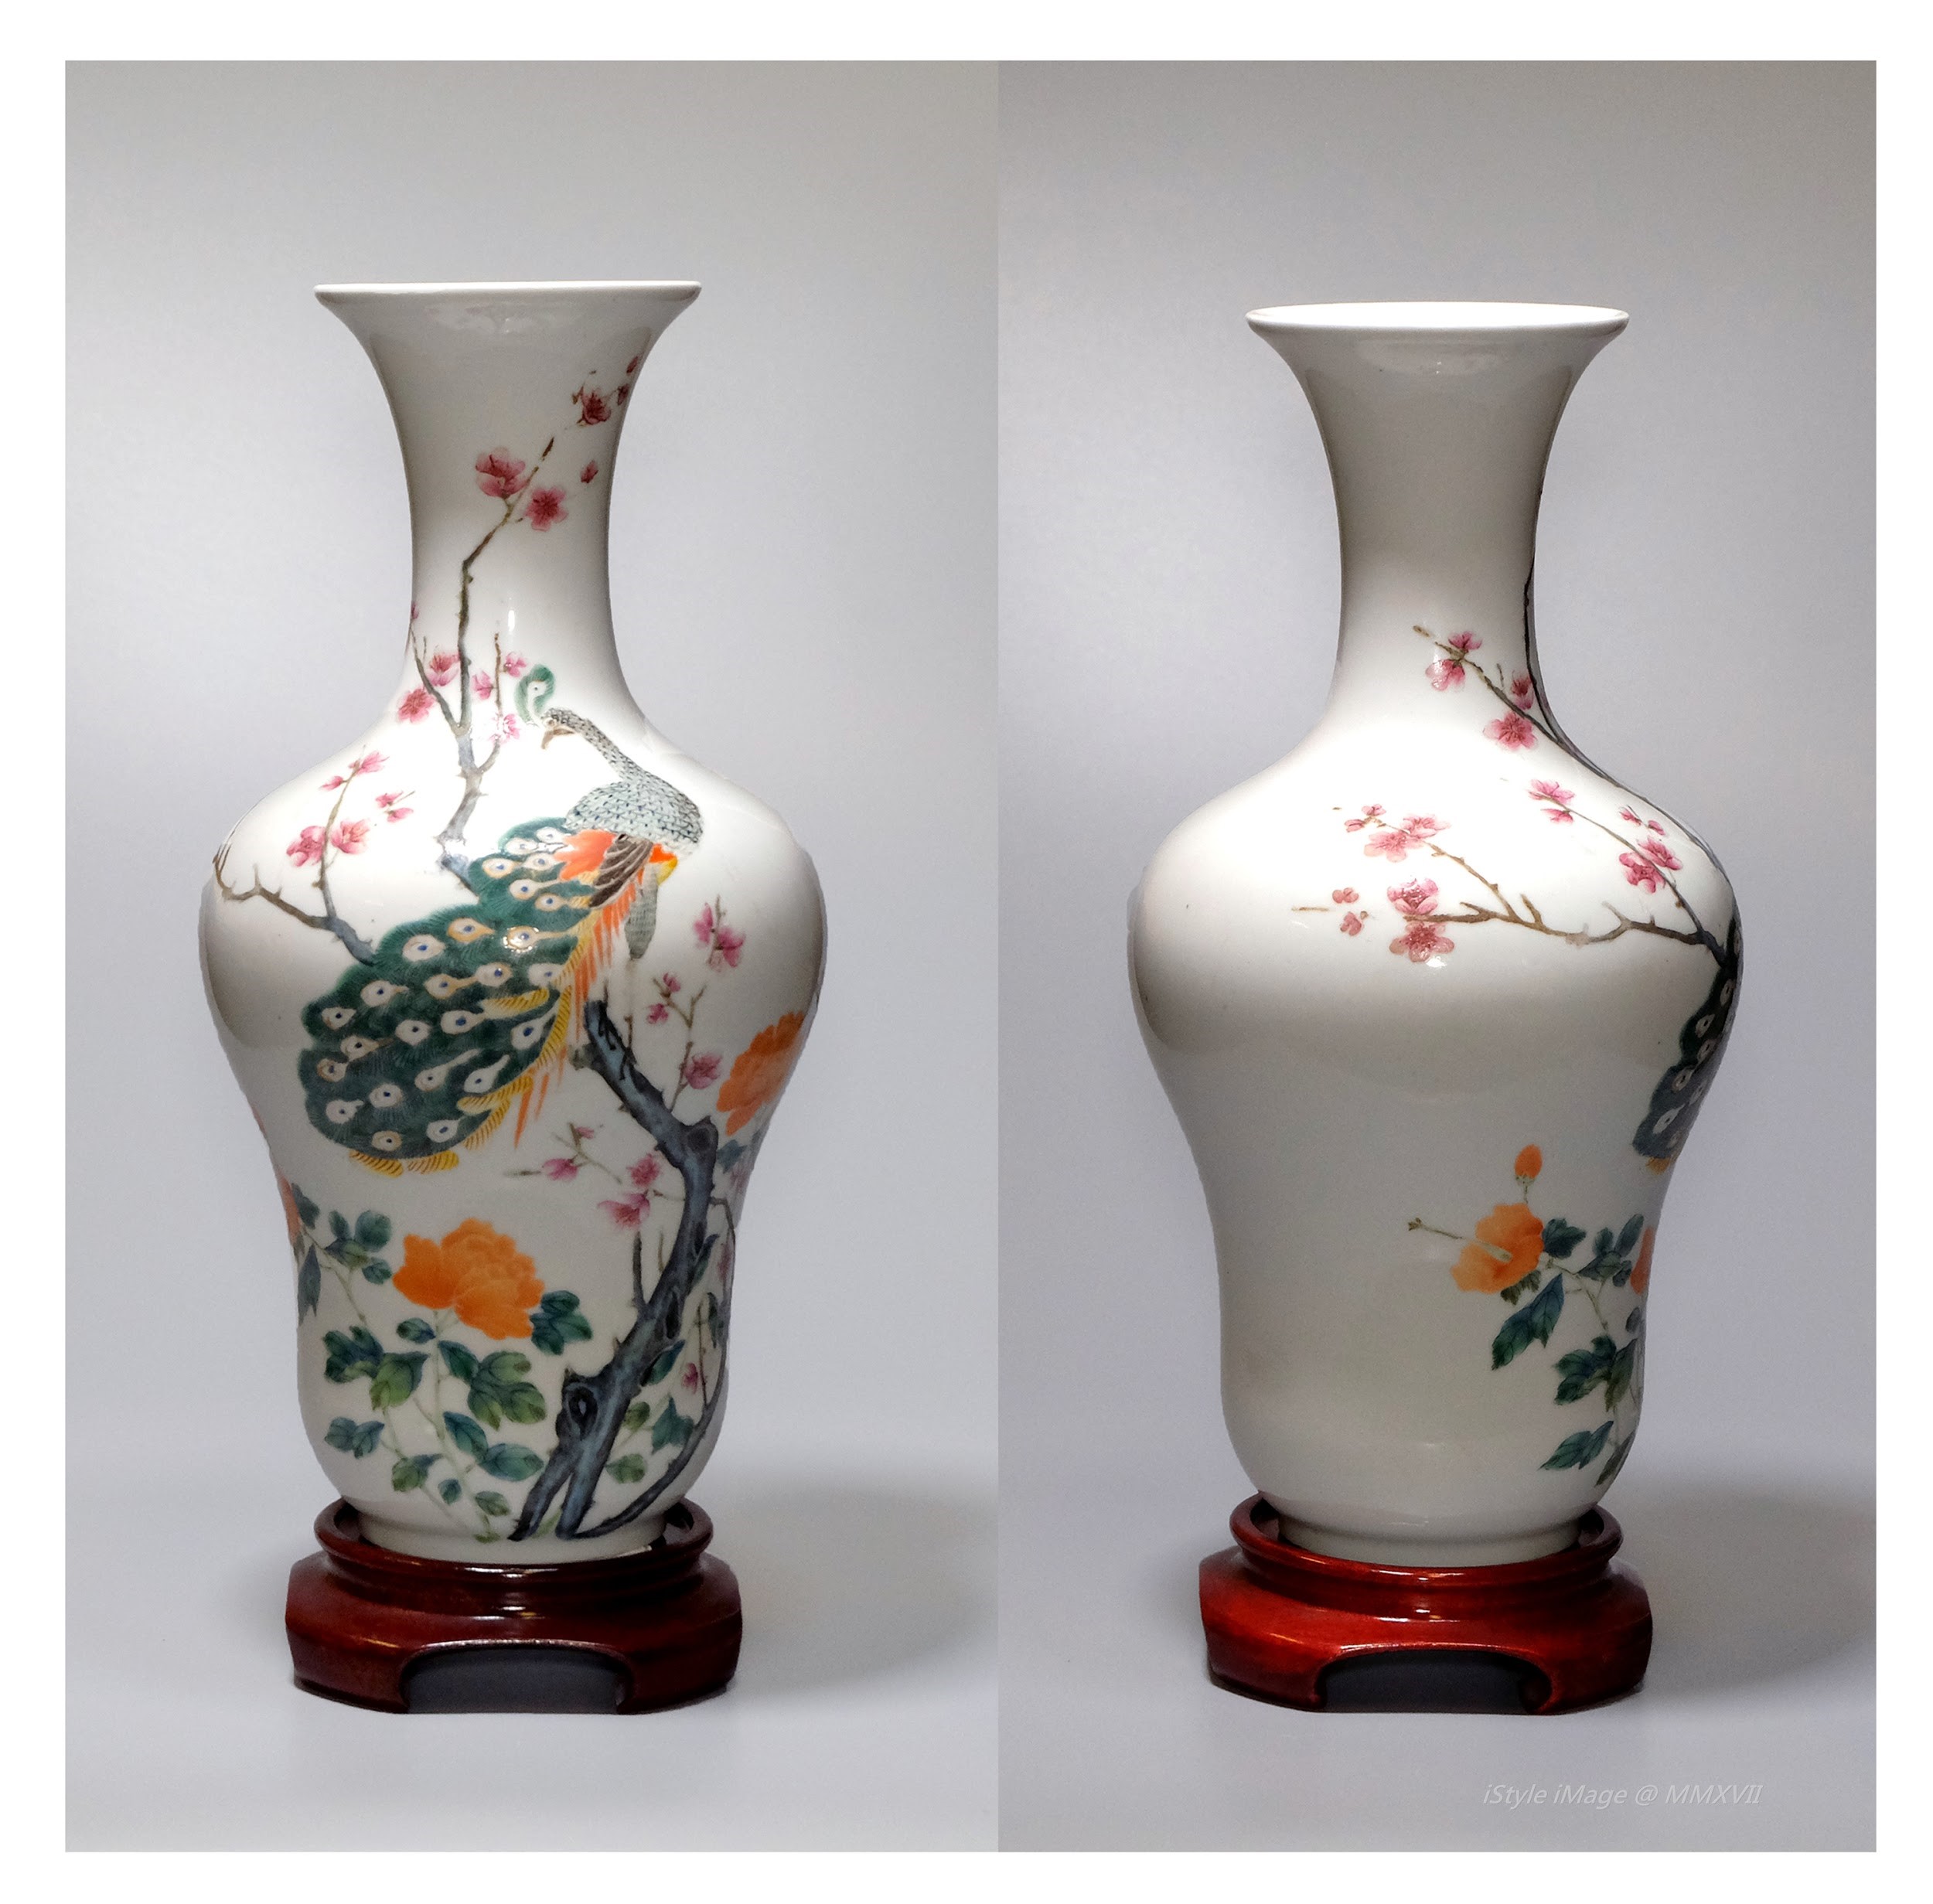 <br><h4>Lot 7 : An exquisite elegance pear-shaped form famille-rose vase  ( early Republic )</h4>
				  A pear-shaped form vase, the globular body gently sloping to an elegant slender neck, brilliantly enamelled with a peacock with blossoming flowers.  The base glazed inscribed with three character '[ū rén tang].
					<br>Measurements (H) high 27.5 CM, (W)width 13.5 CM<br><br><br>梨形粉彩花瓶  ( 民國早期 )<br>梨形花瓶球體輕輕上升到優雅細長的頸部，燦爛地繪上孔雀與朵朵鮮花。底款[居仁堂]<br>尺寸(H)高 27.5 厘米,  (W)濶13.5 厘米